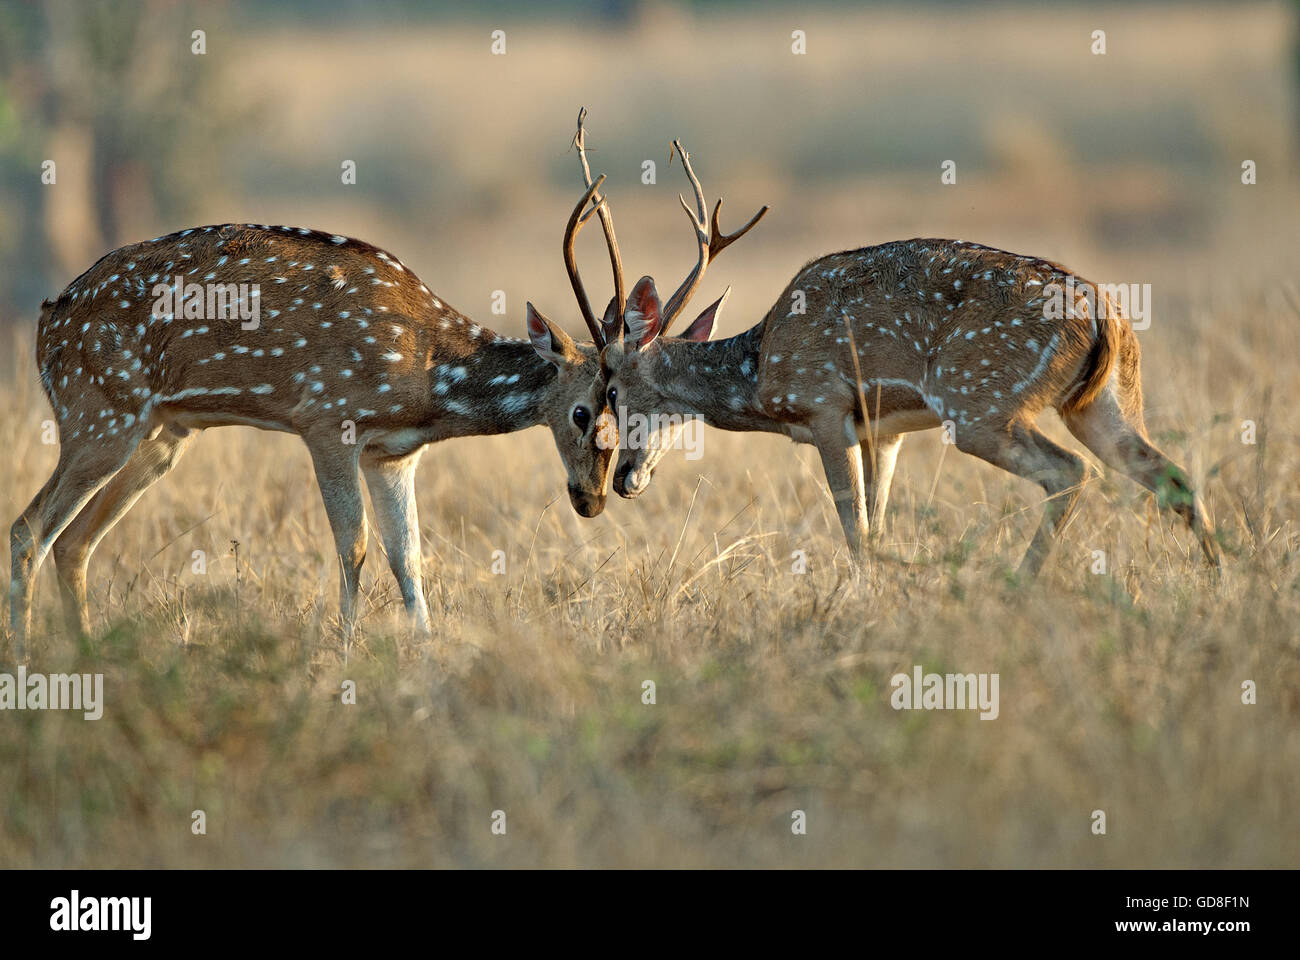 The image of Spotted deer ( Axis axis ) fight , Bandavgarh national park, India Stock Photo